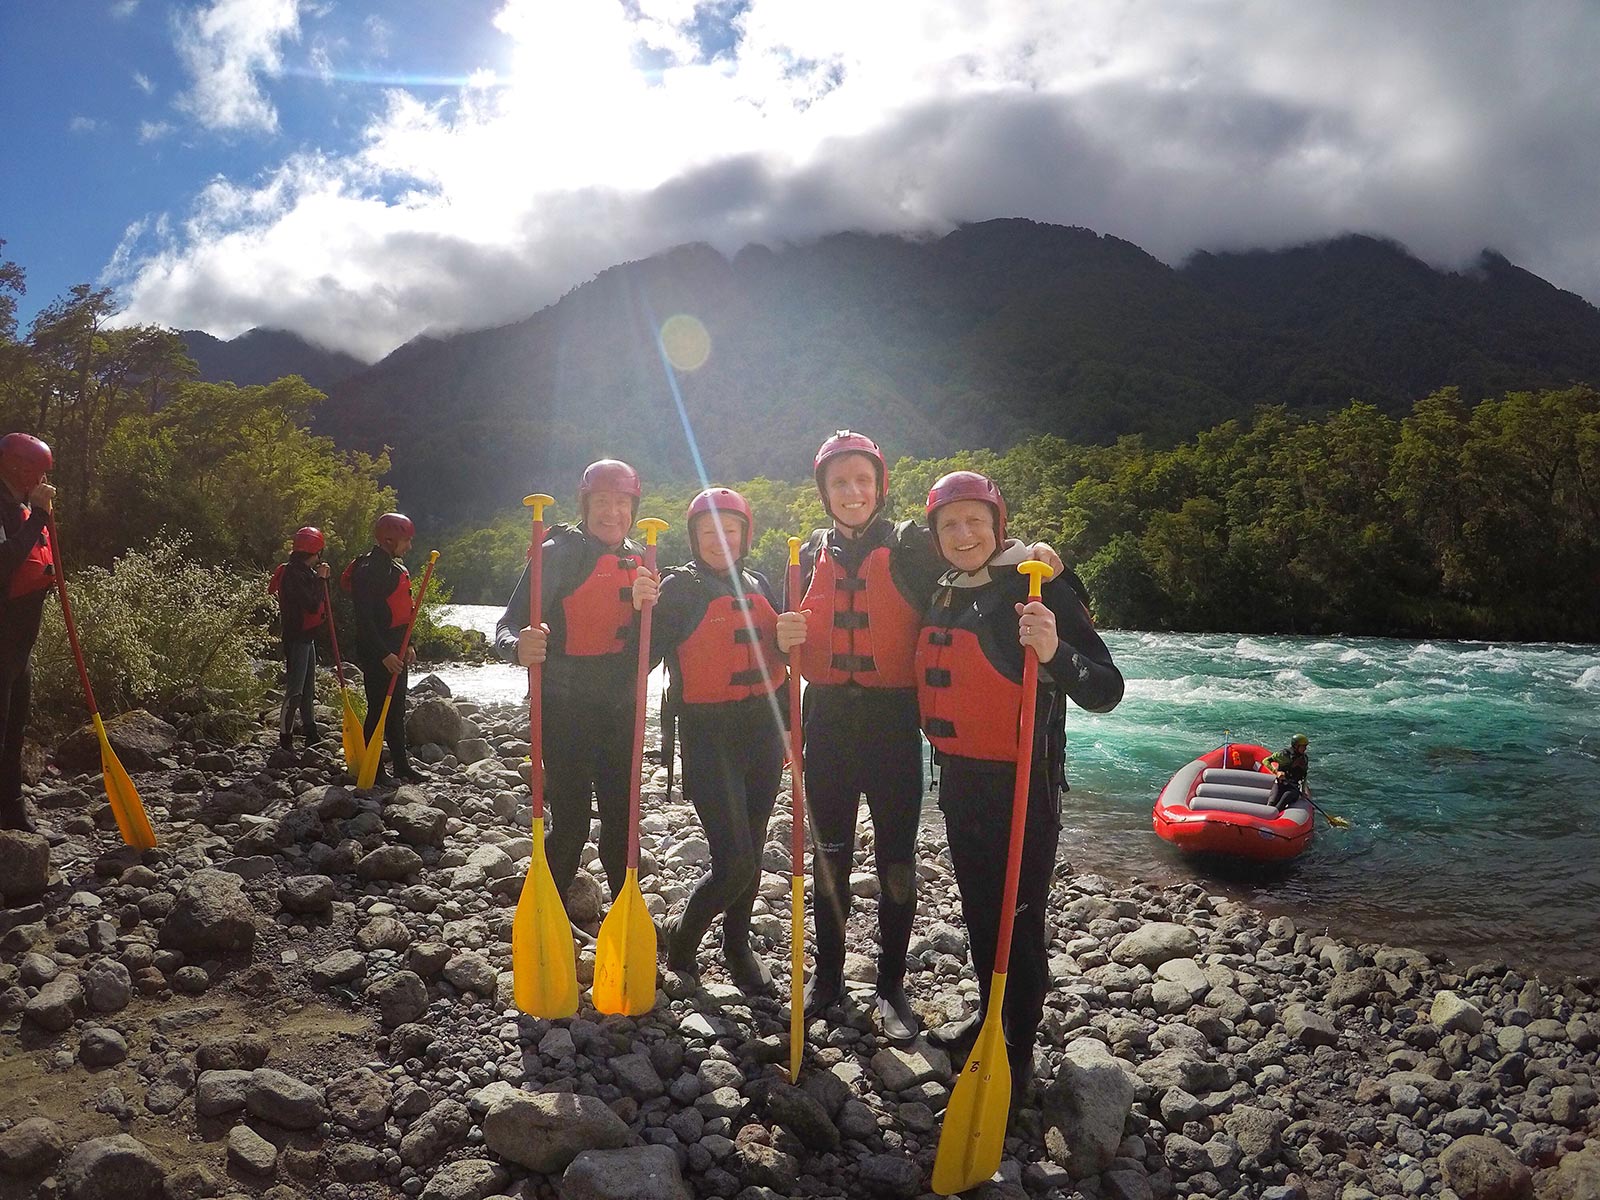 David Simpson and dad with friends on White Water rafting at Puerto Montt, Chile. Valparaiso & The Cruise to the end of the World pt3